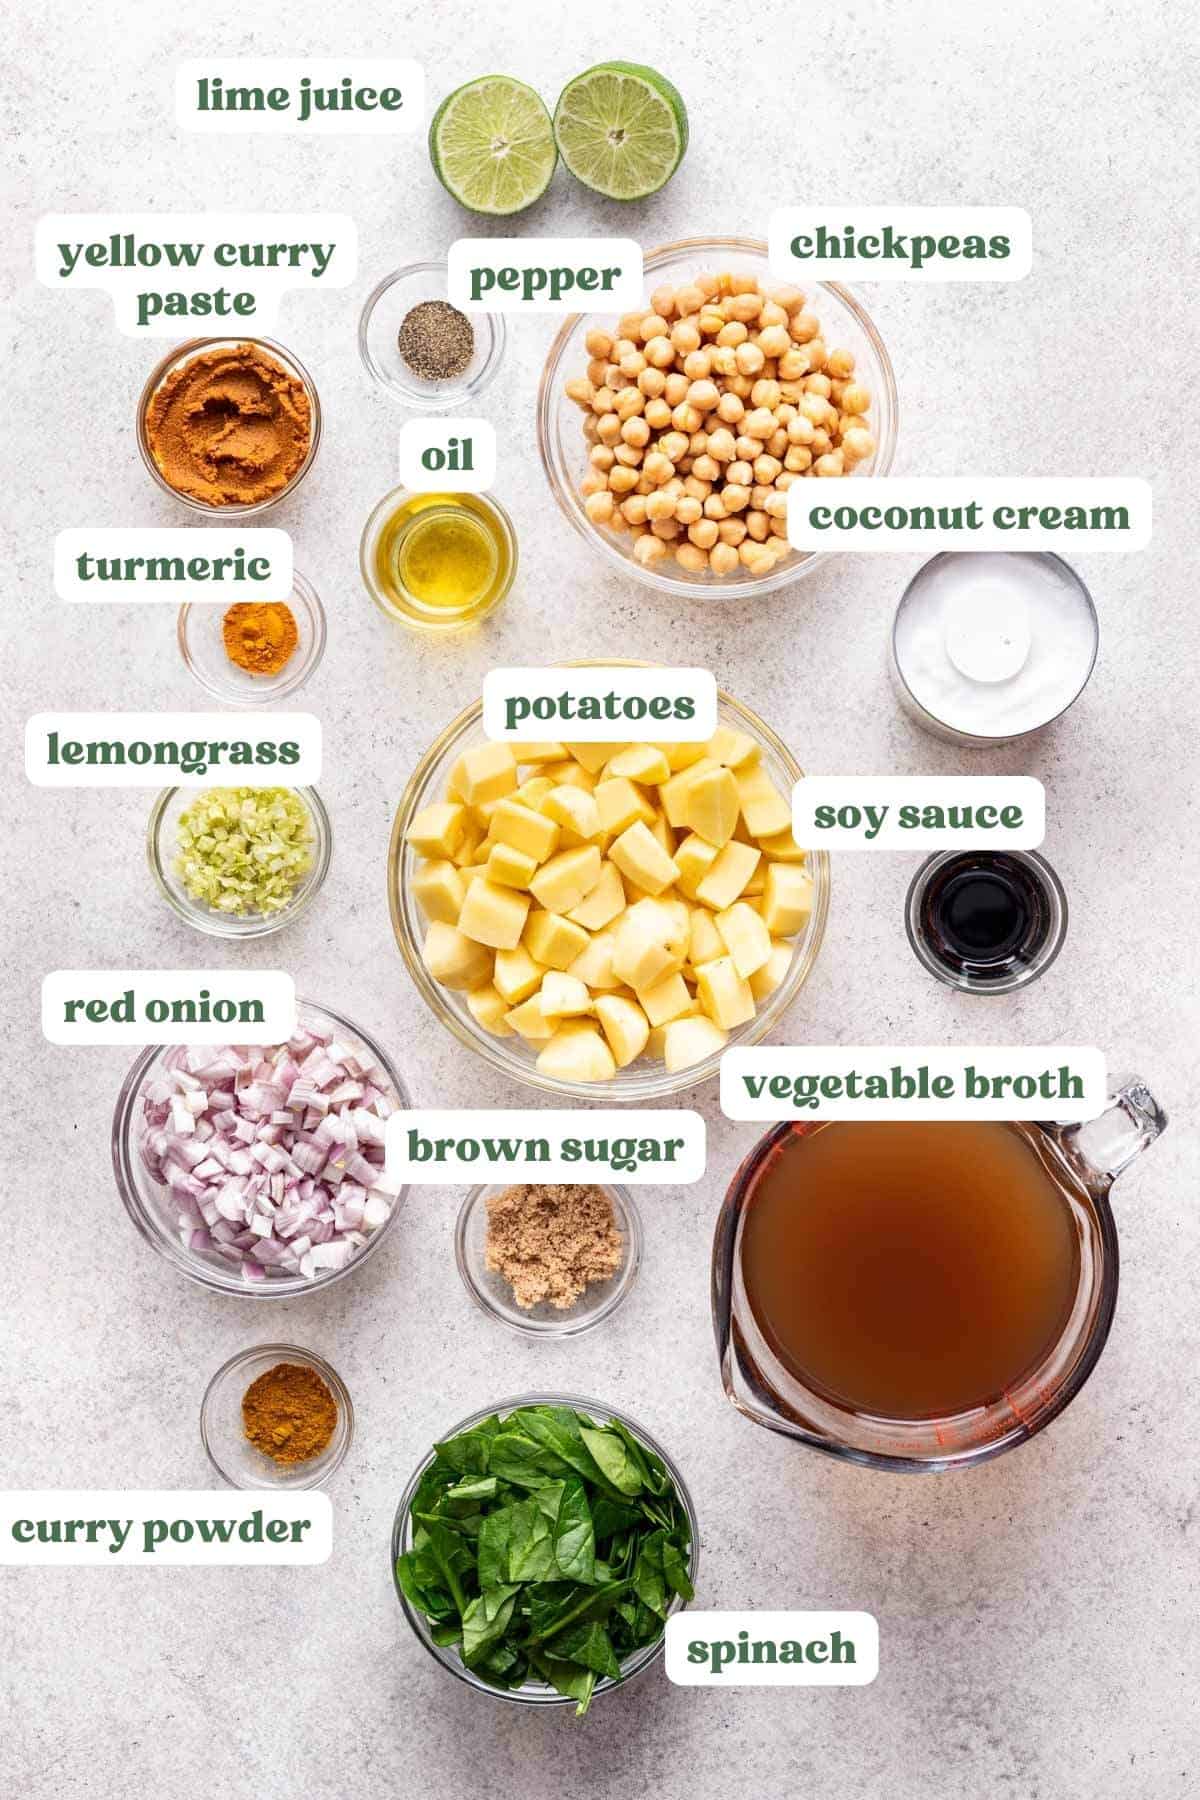 Ingredients needed for yellow curry measured and labeled in individual bowls.